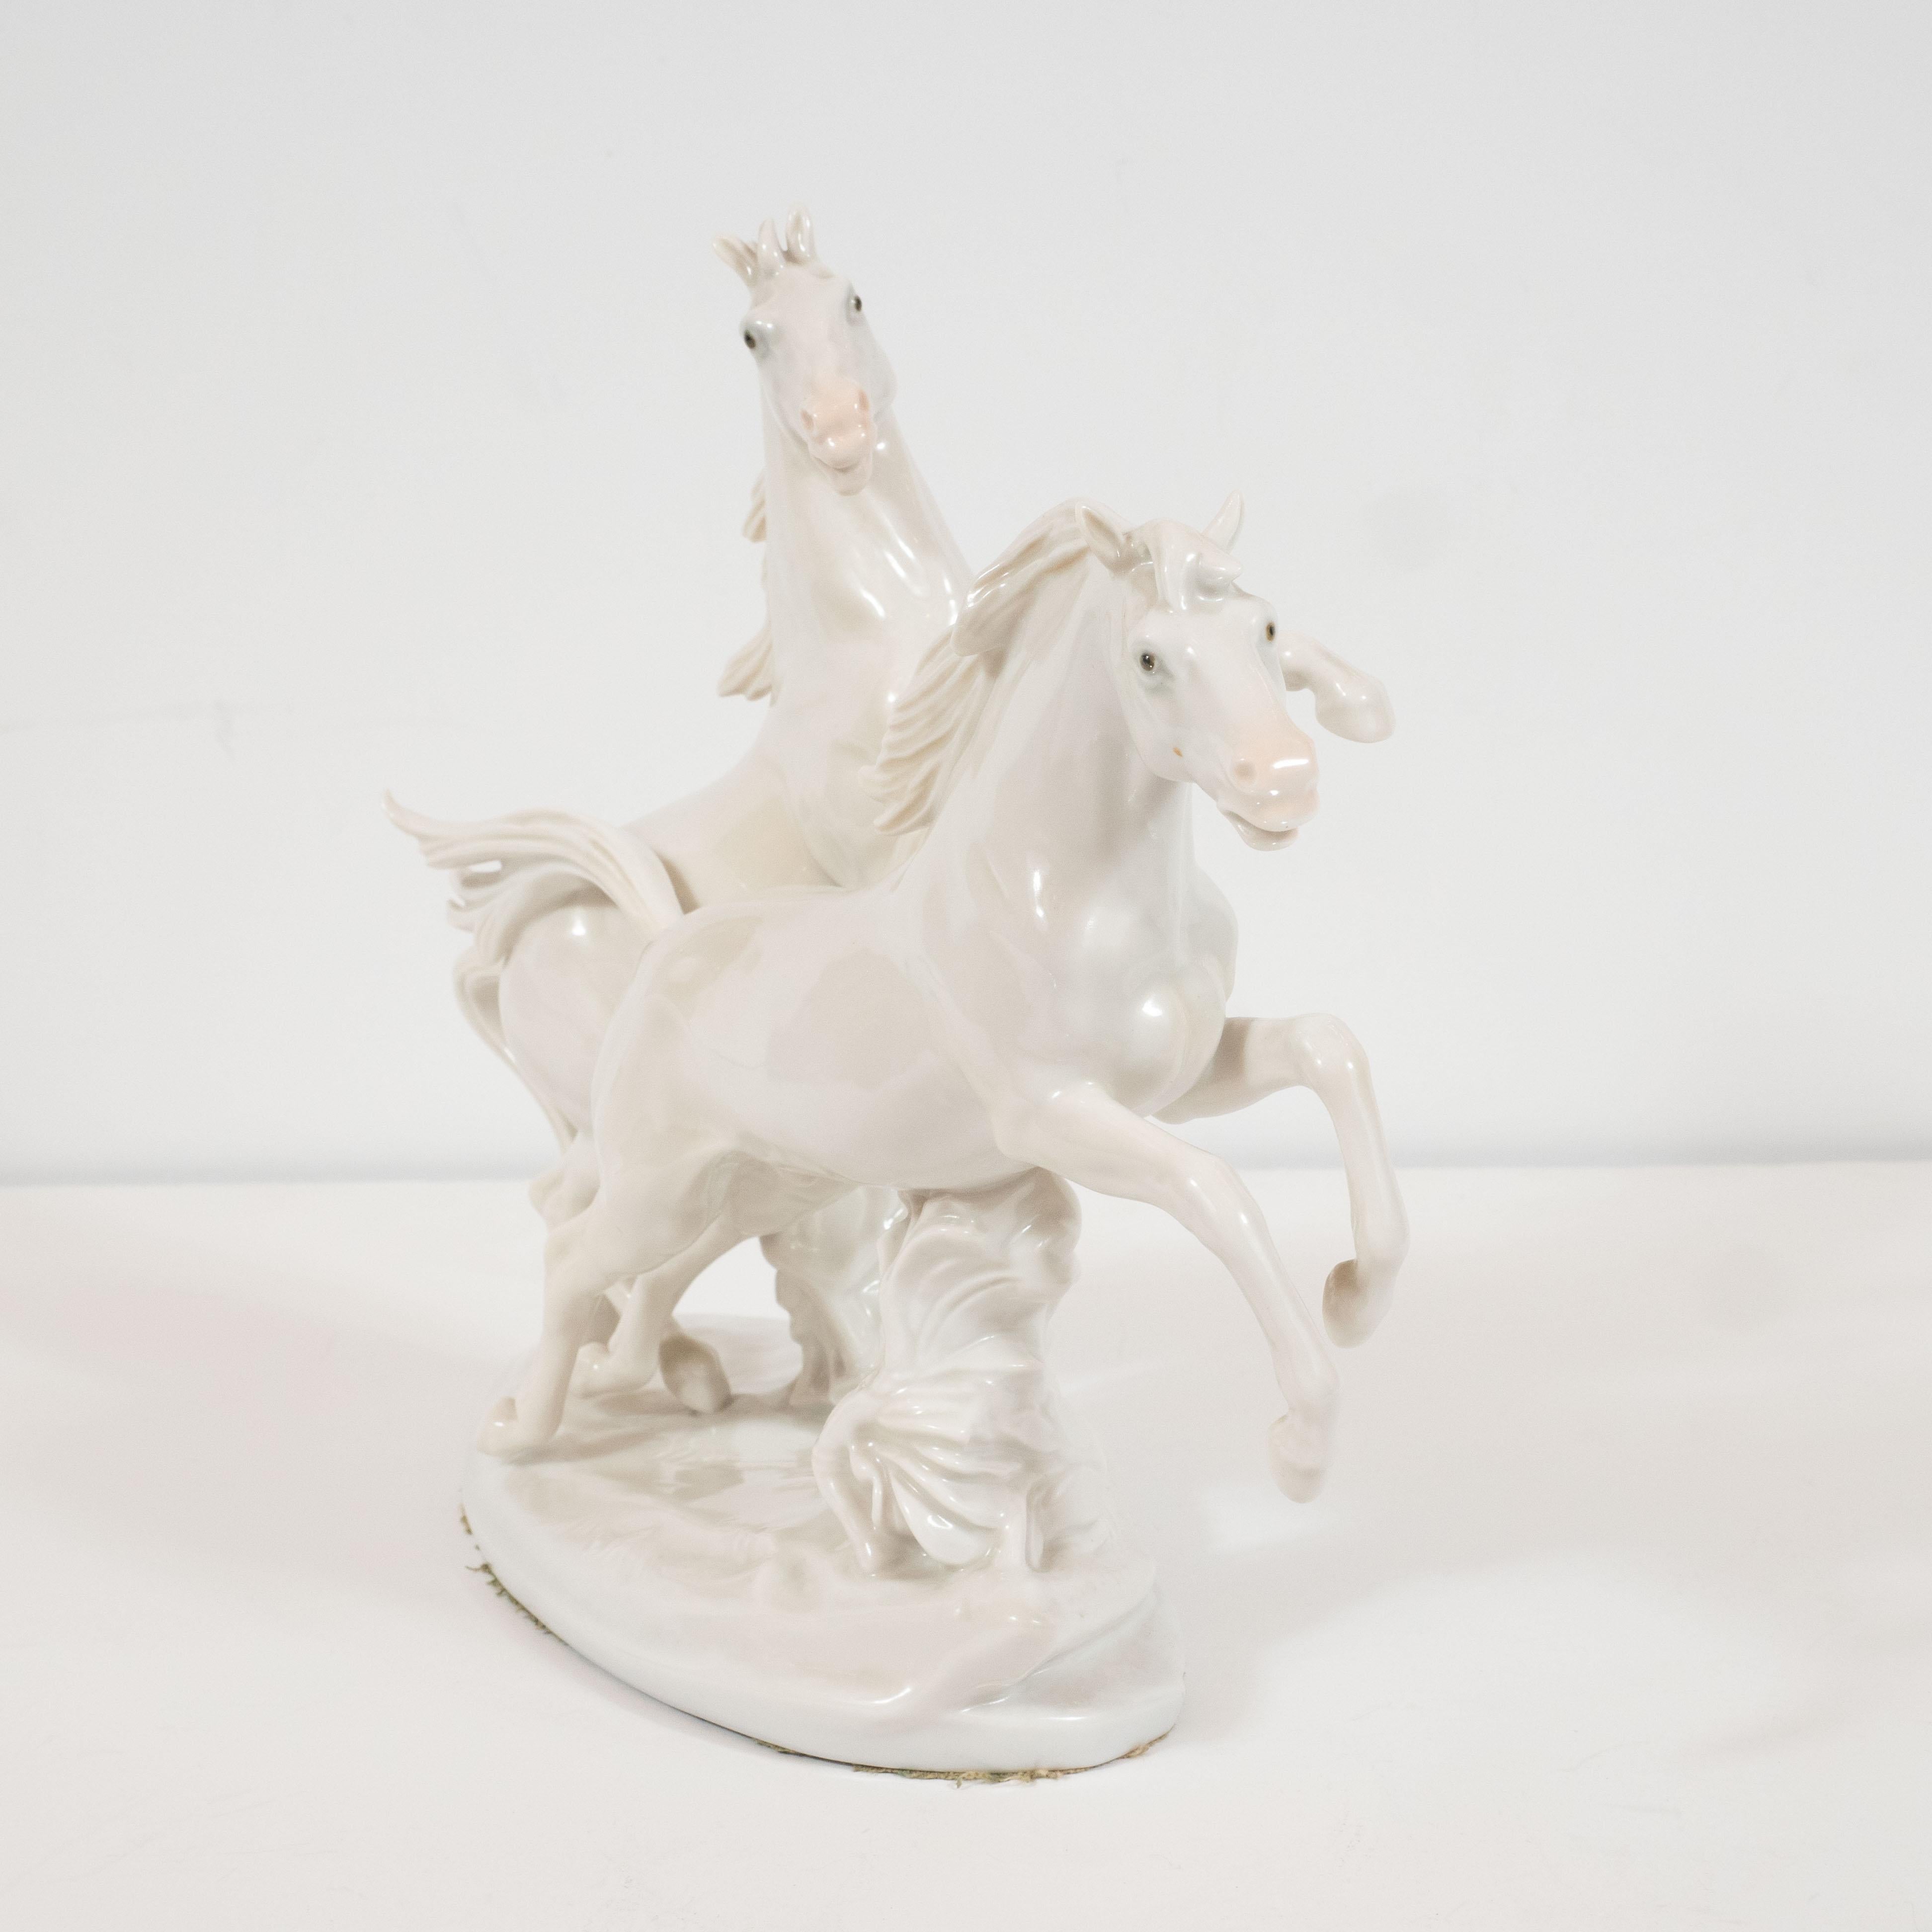 German Art Deco White Porcelain Galloping Horse Sculptures Signed by Karl Ens For Sale